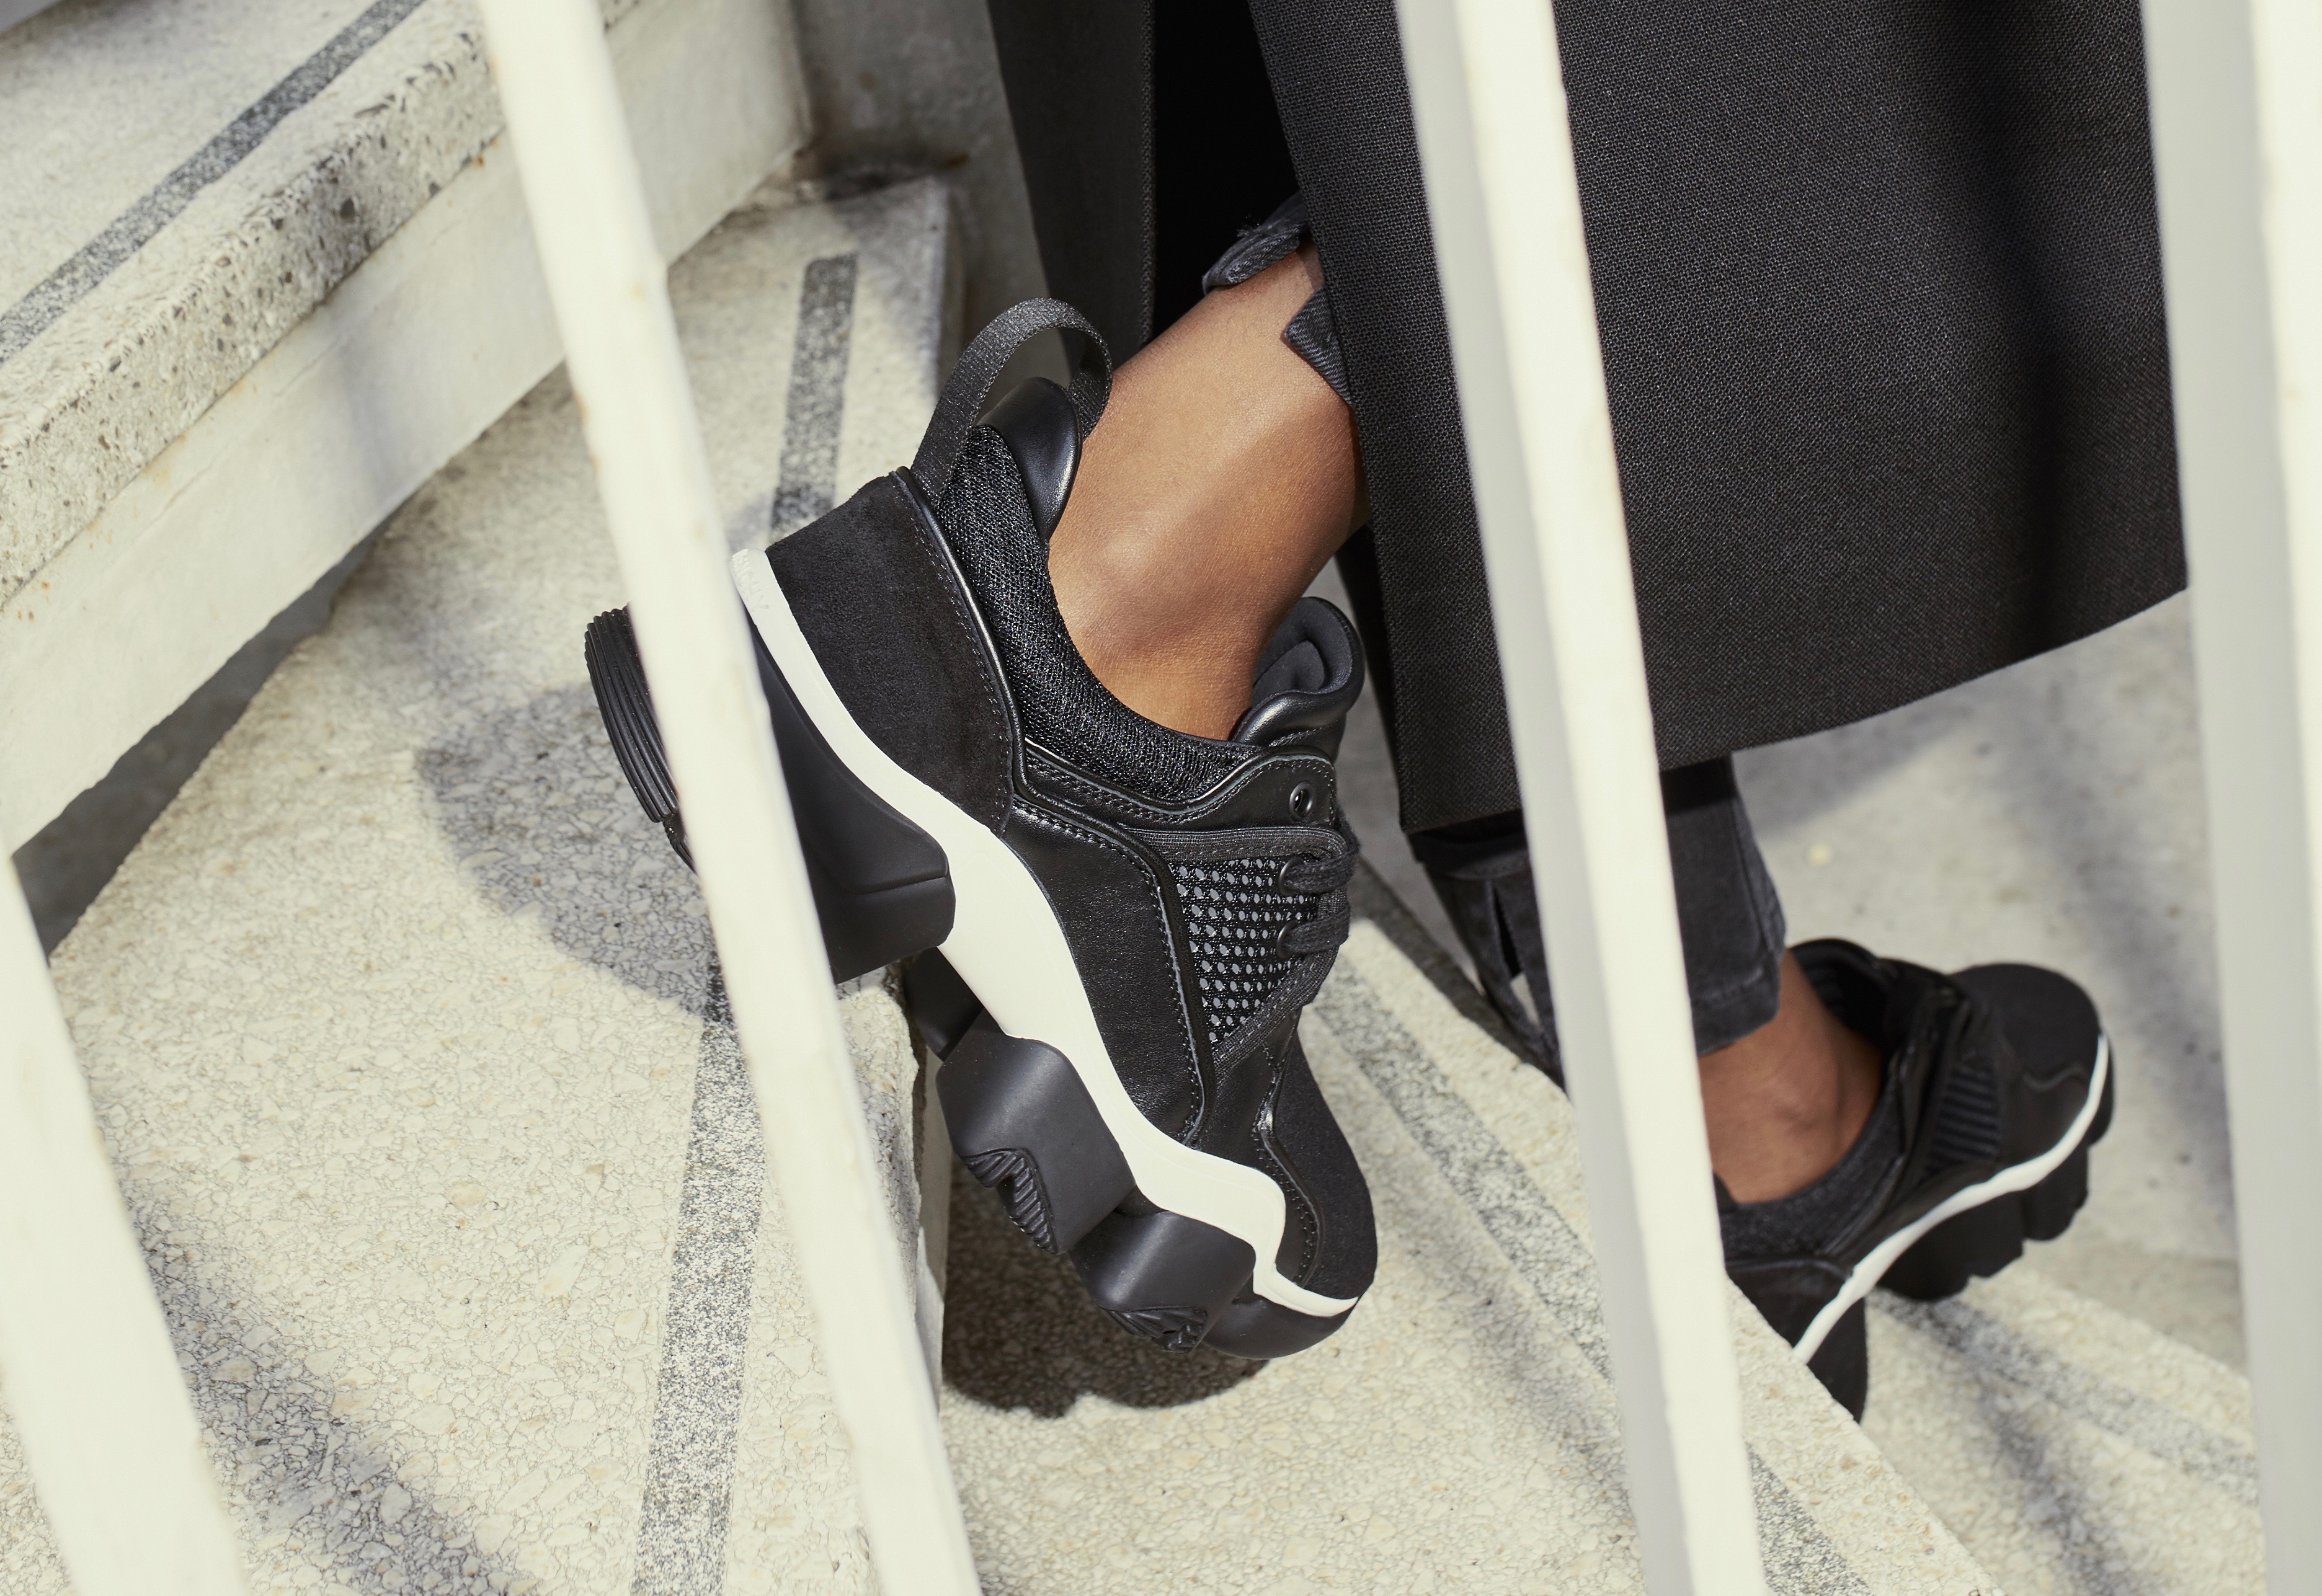 Jaw Sneakers are Now Available for Women